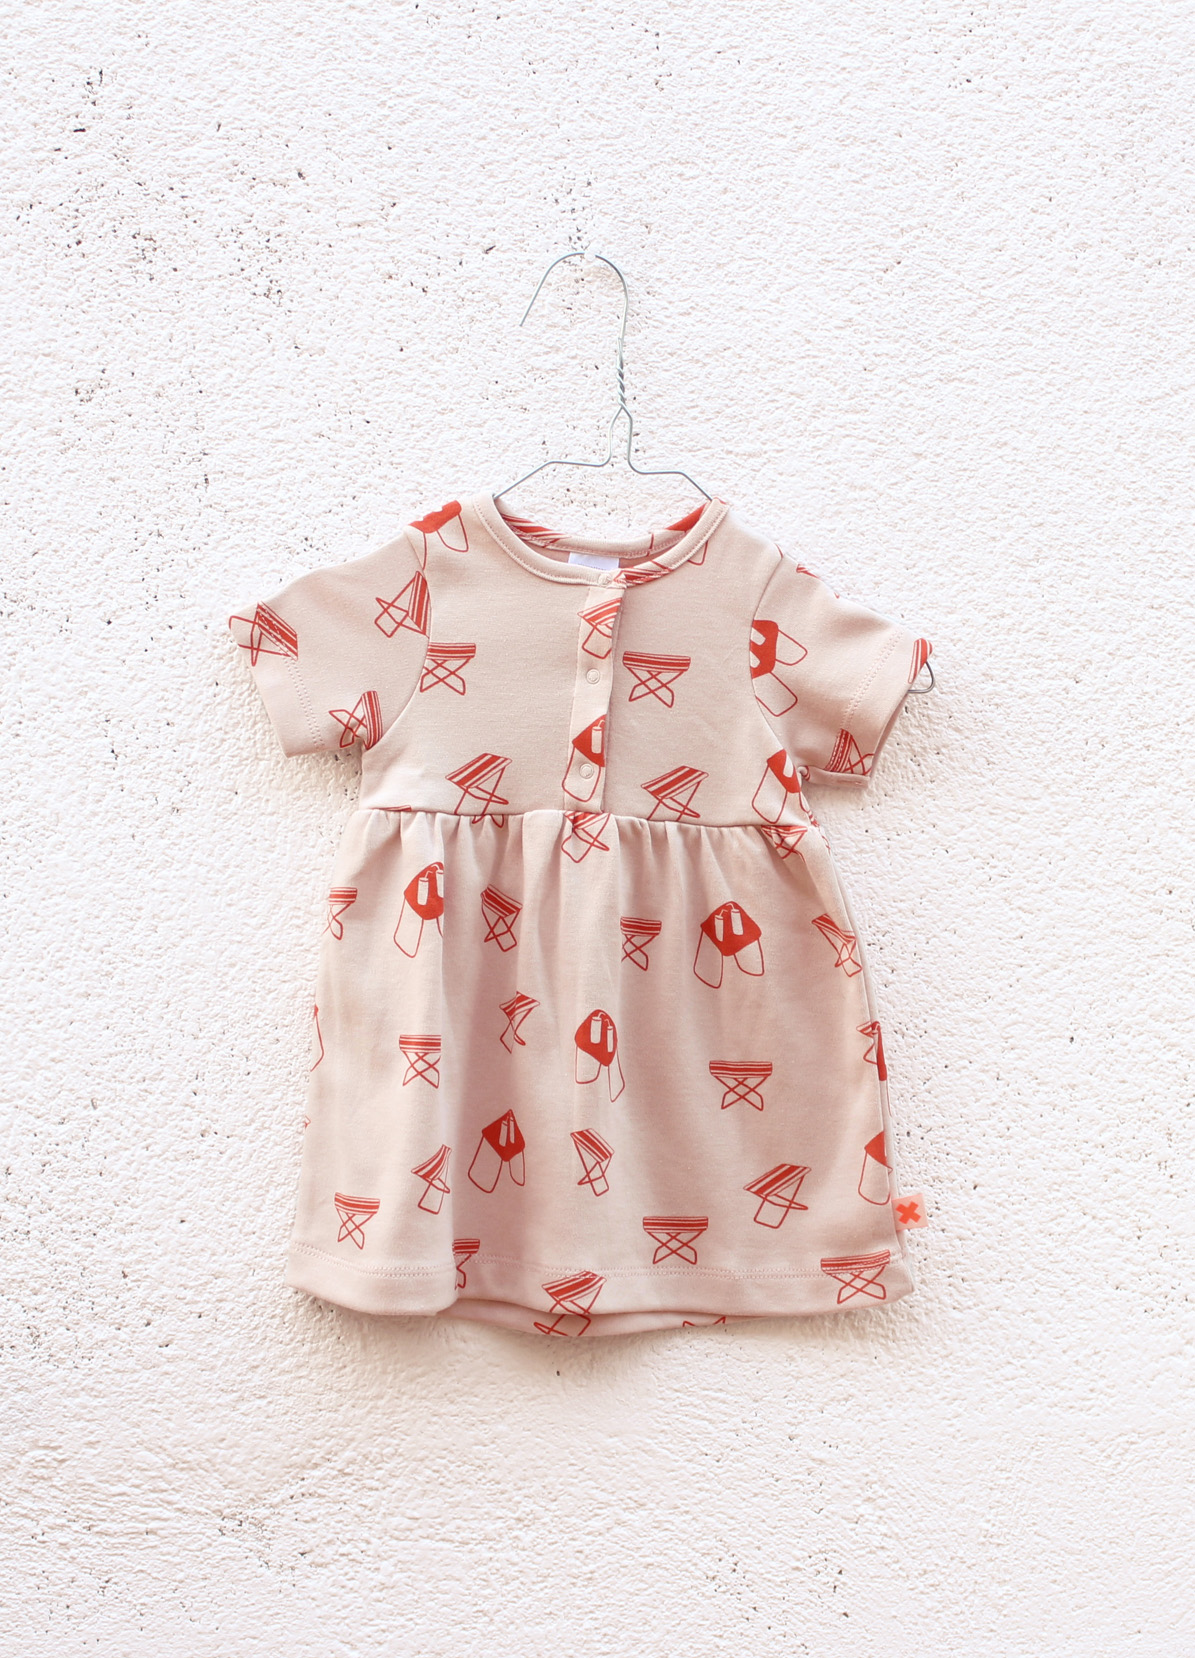 SS15_tinycottons16_s